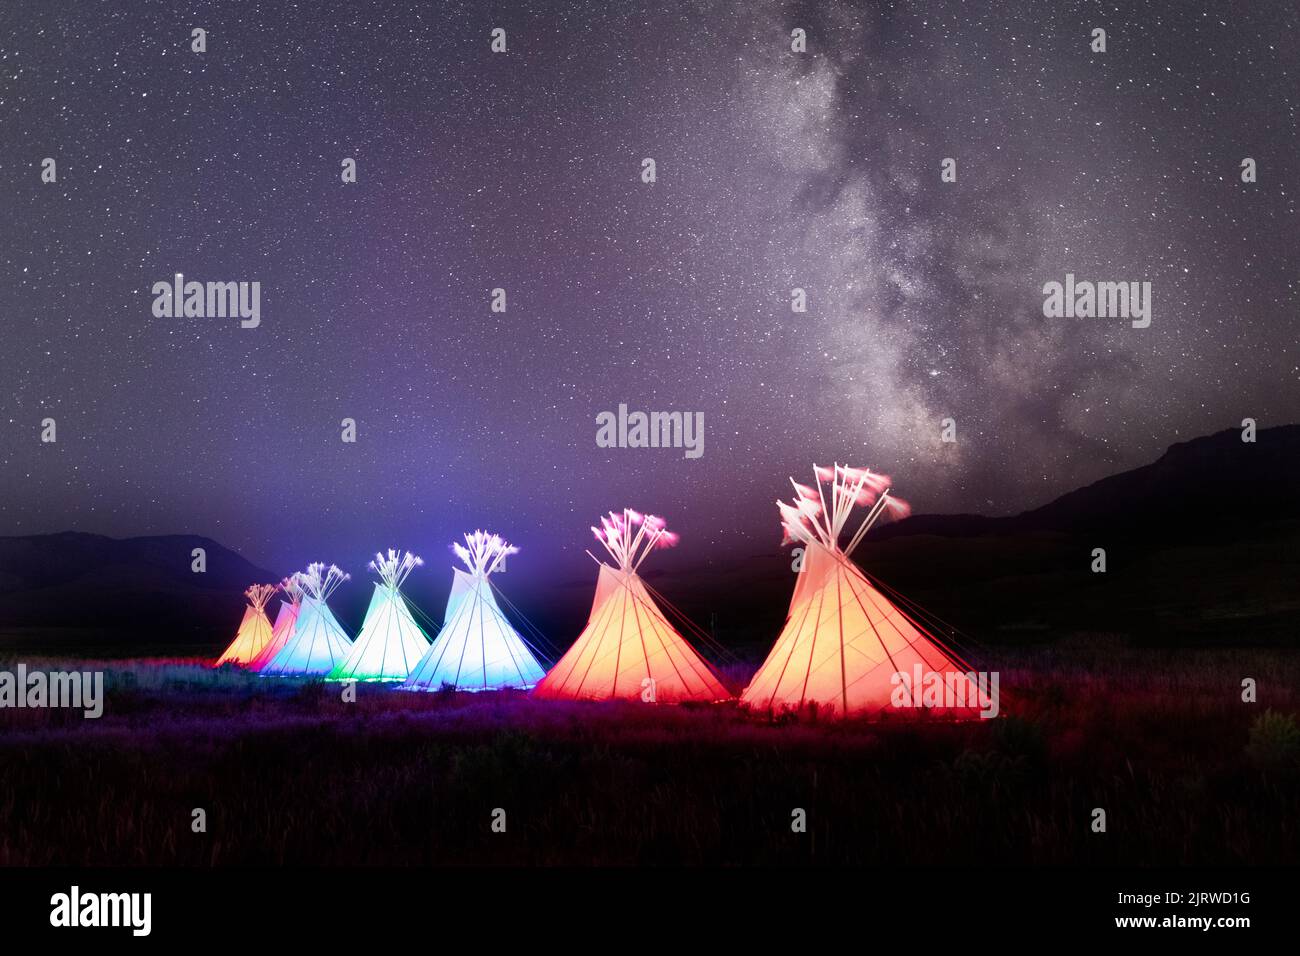 Madison Junction, United States of America. 17 August, 2022. Native American teepee lodges at the All Nations Teepee Village light at night under the Milky Way to mark the 150th anniversary of Yellowstone National Park August 17, 2022 in Madison Junction, Montana. The project by Mountain Time Arts features 13 teepee lodges that signify a new era of Indigenous inclusion and representation in Yellowstone National Park. Credit: Jacob W. Frank/NPS/Alamy Live News Stock Photo